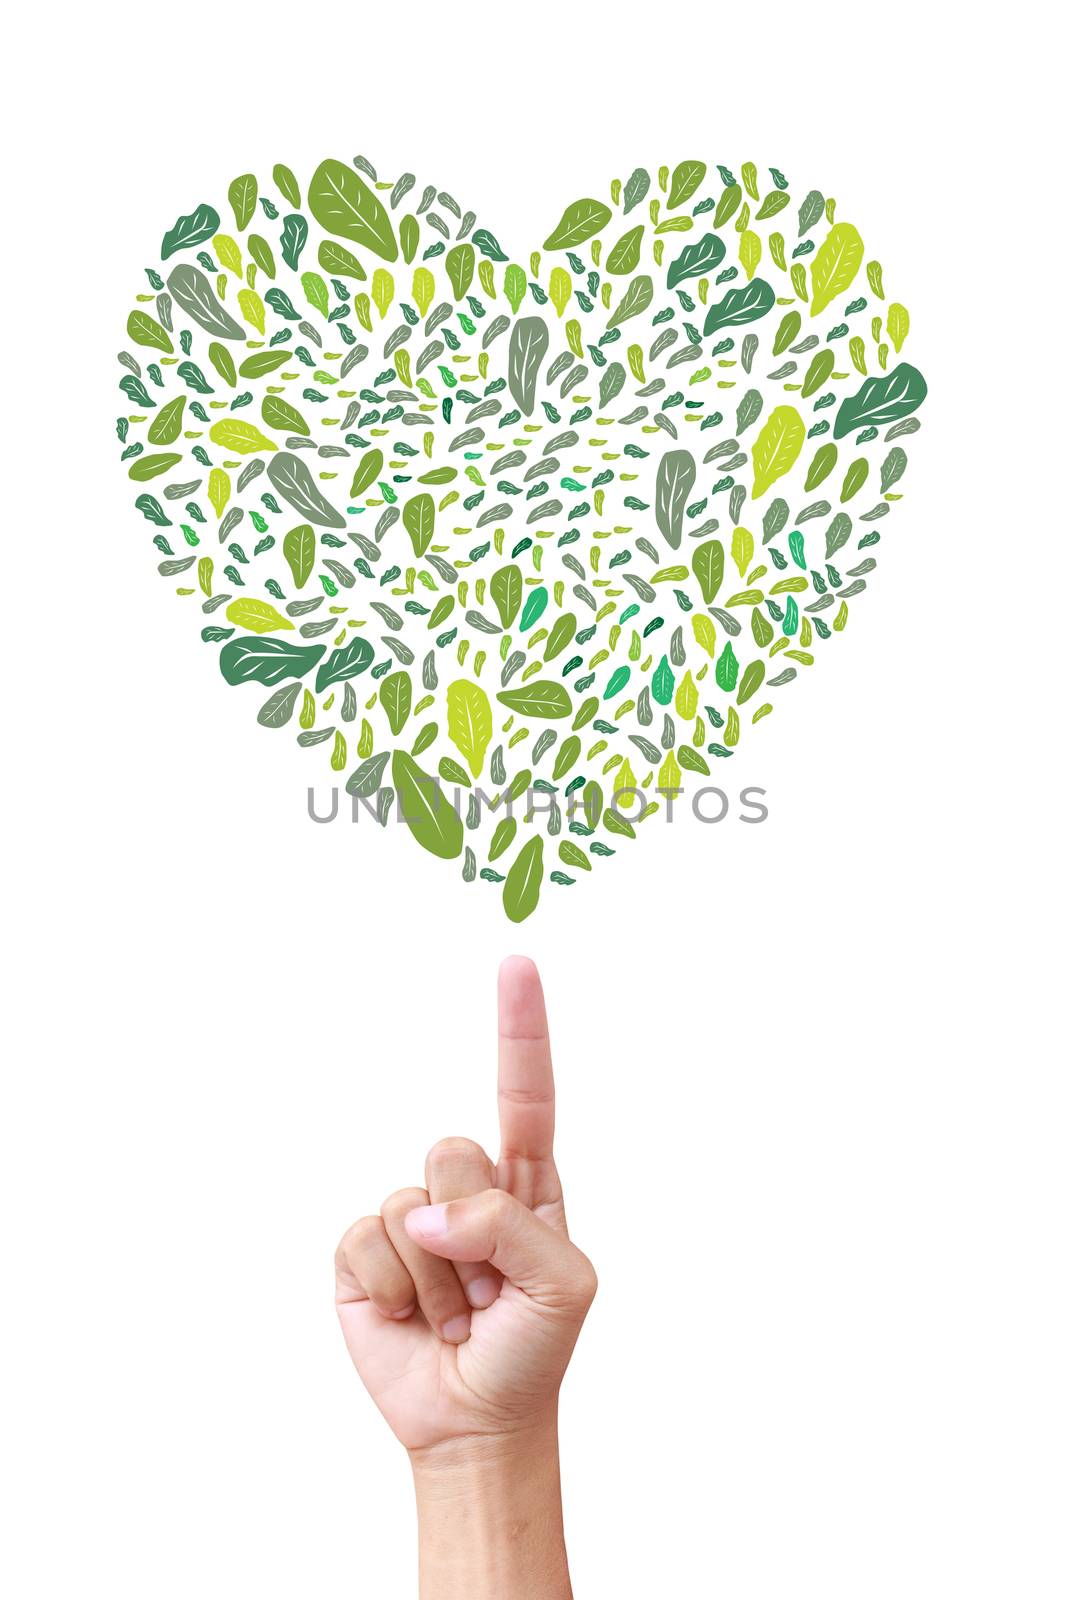  heart made of leaves(eco concept ) by rufous